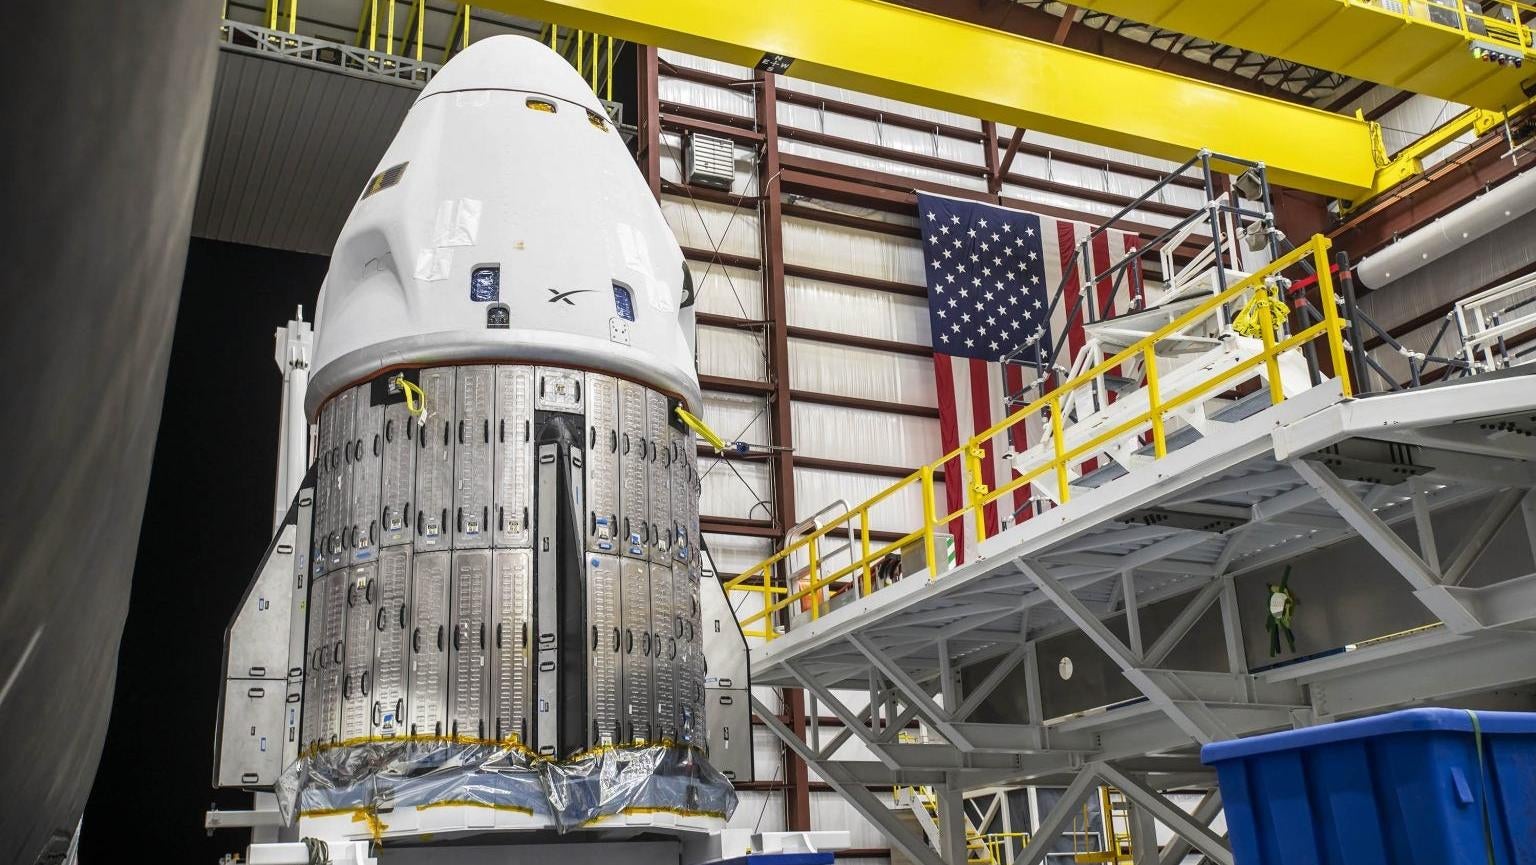 SpaceX's Crew Dragon Endurance spacecraft in a hanger at NASA's Kennedy Space Centre in Florida.  (Image: SpaceX)